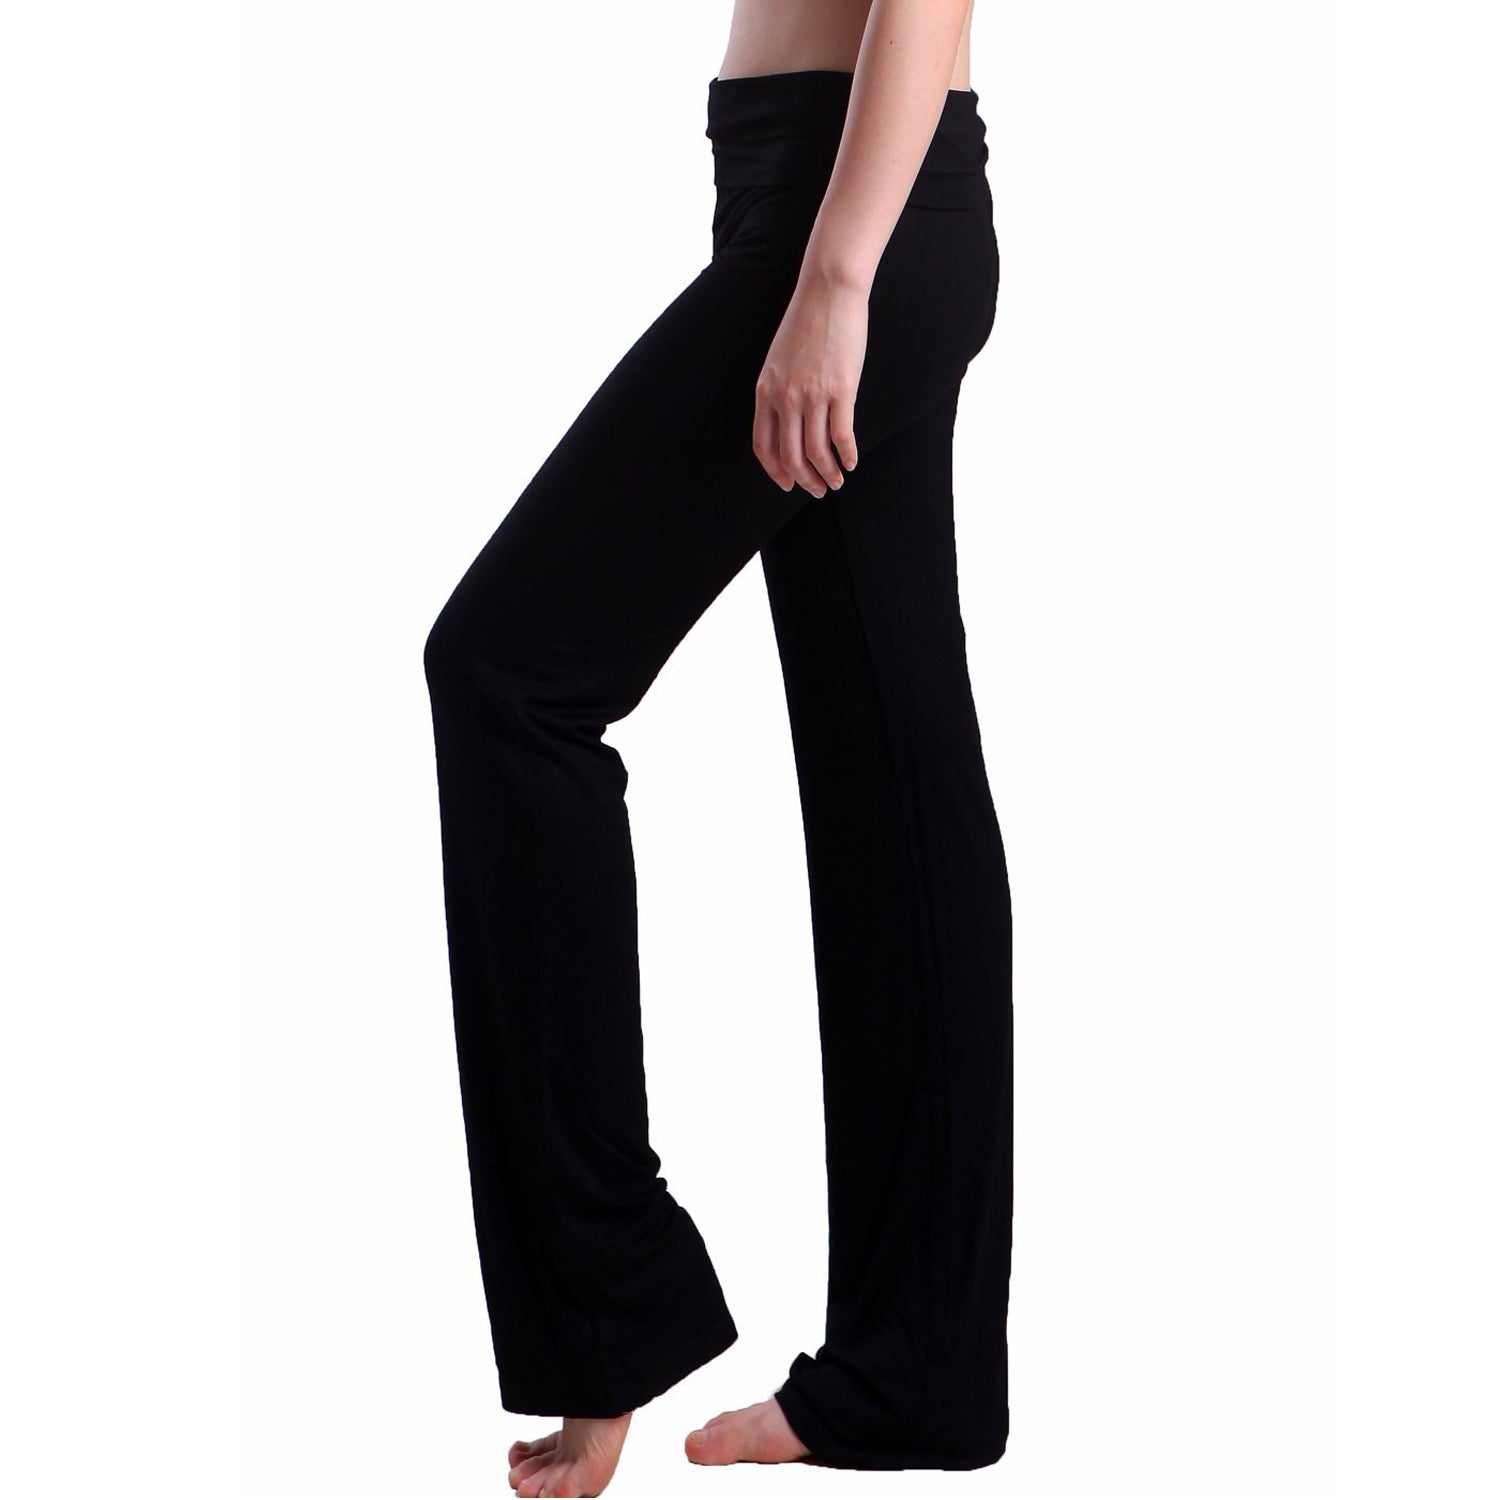 Women's Cotton Spandex Yoga Pants with Fold-Over Waistband 